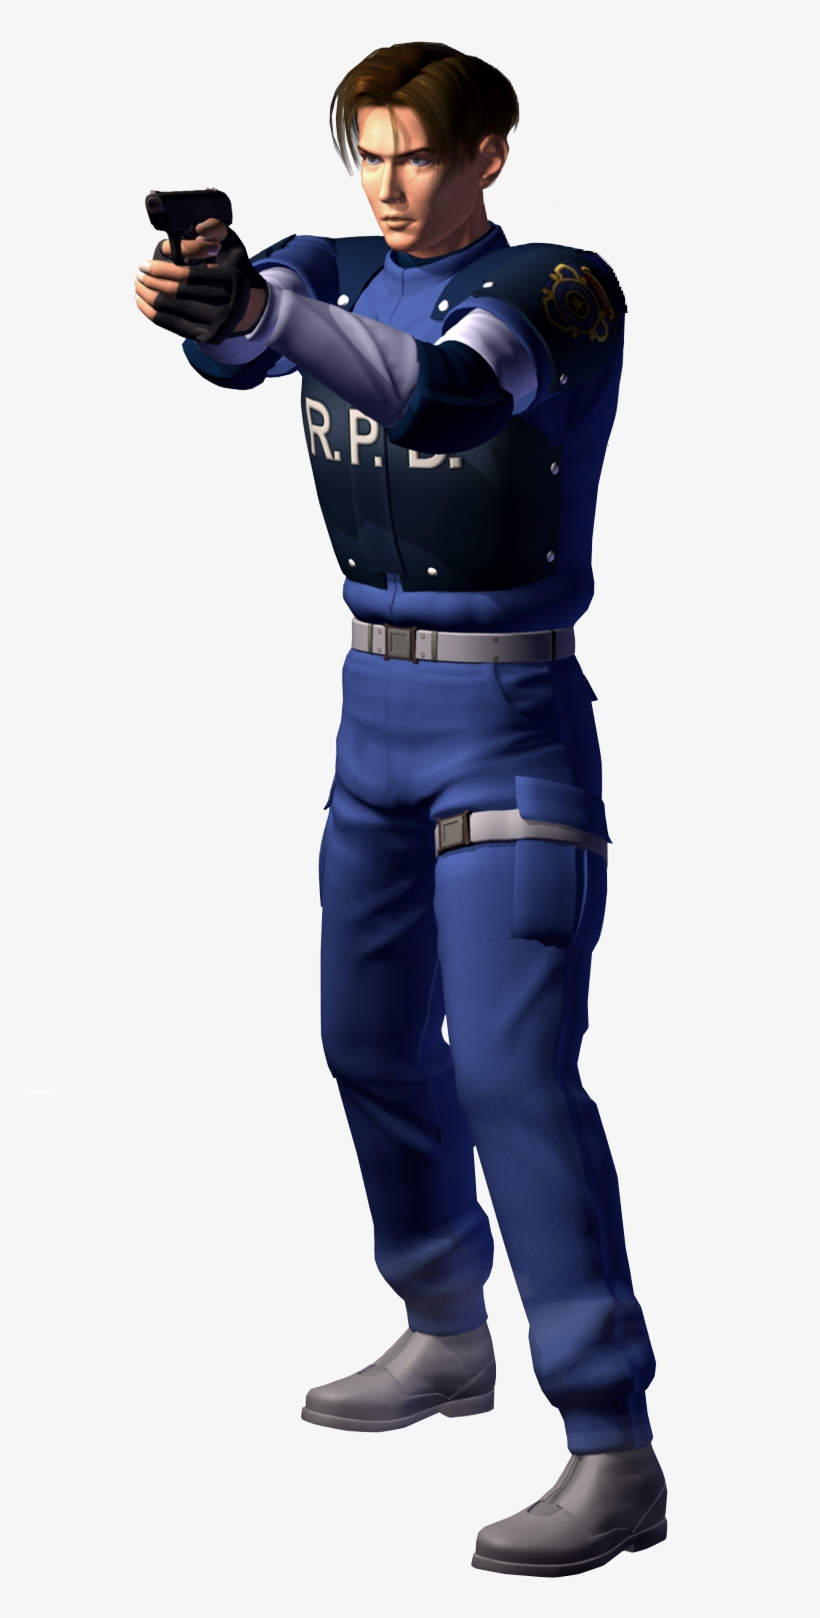 Leon S - Kennedy - Leon S Kennedy Re1, transparent png #1680505